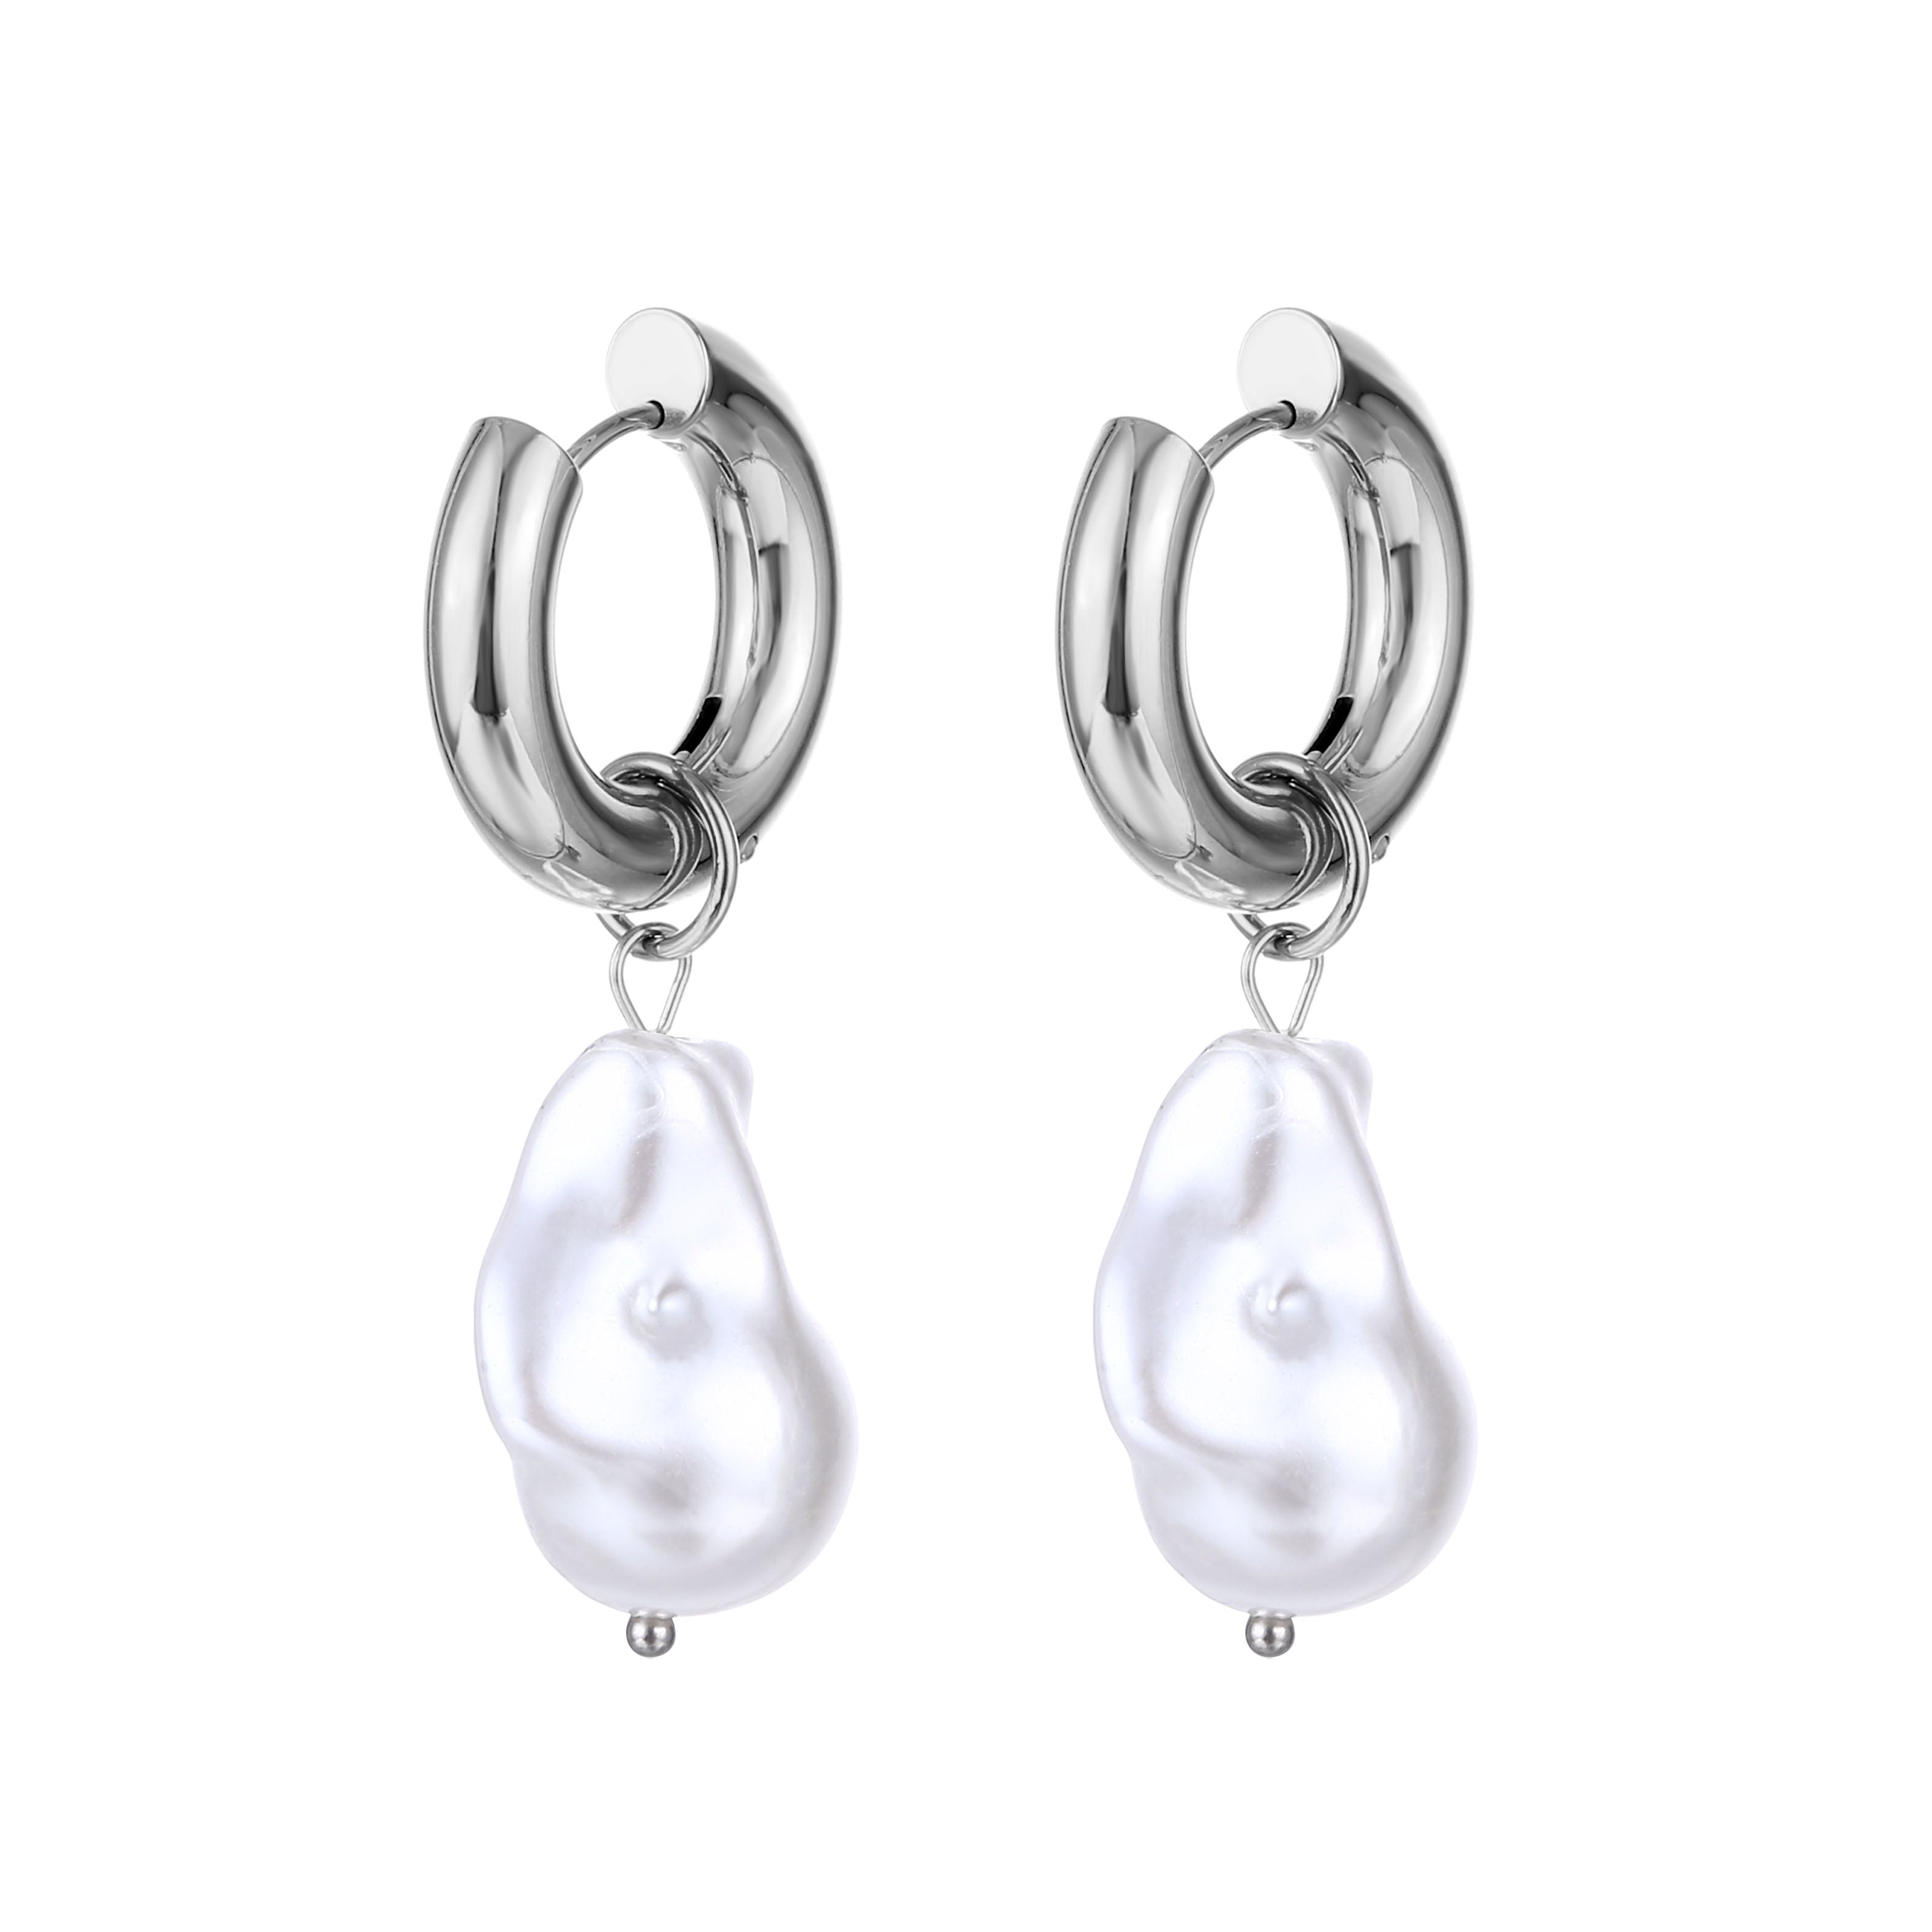 Our best-selling earring, the Rosie hoops will quickly become your go-to everyday style.
Having the added benefit of removing the pearls so can use as normal hoops m